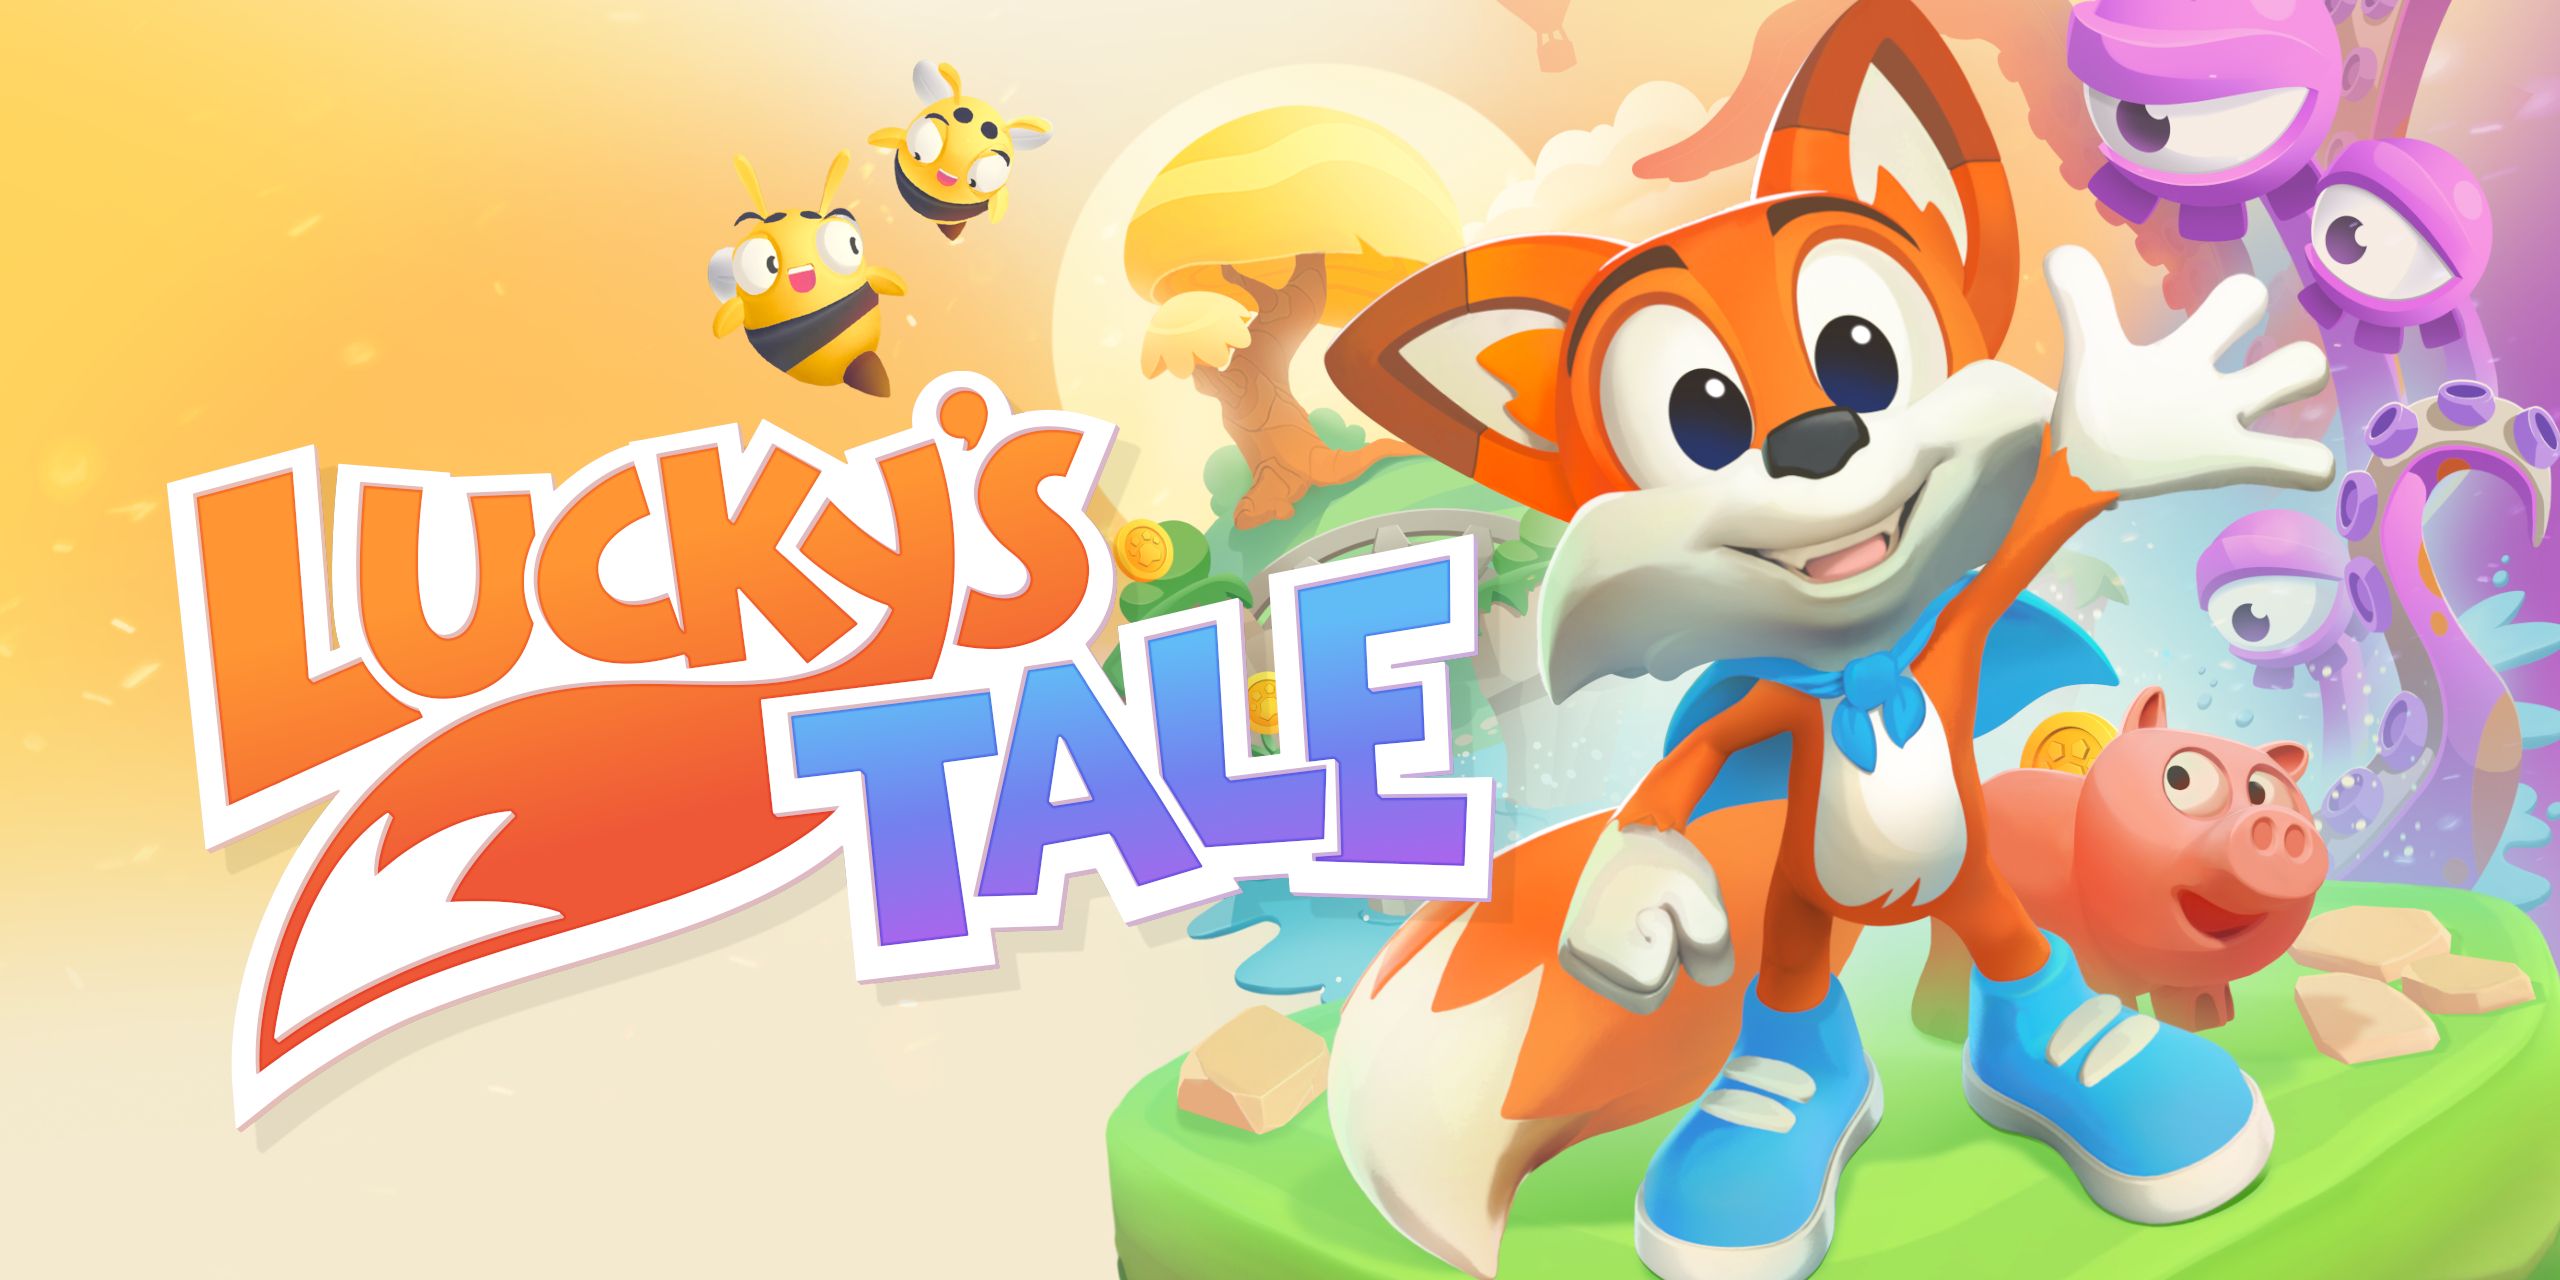 Luckys Tale Review A Cute and Simple VR Adventure